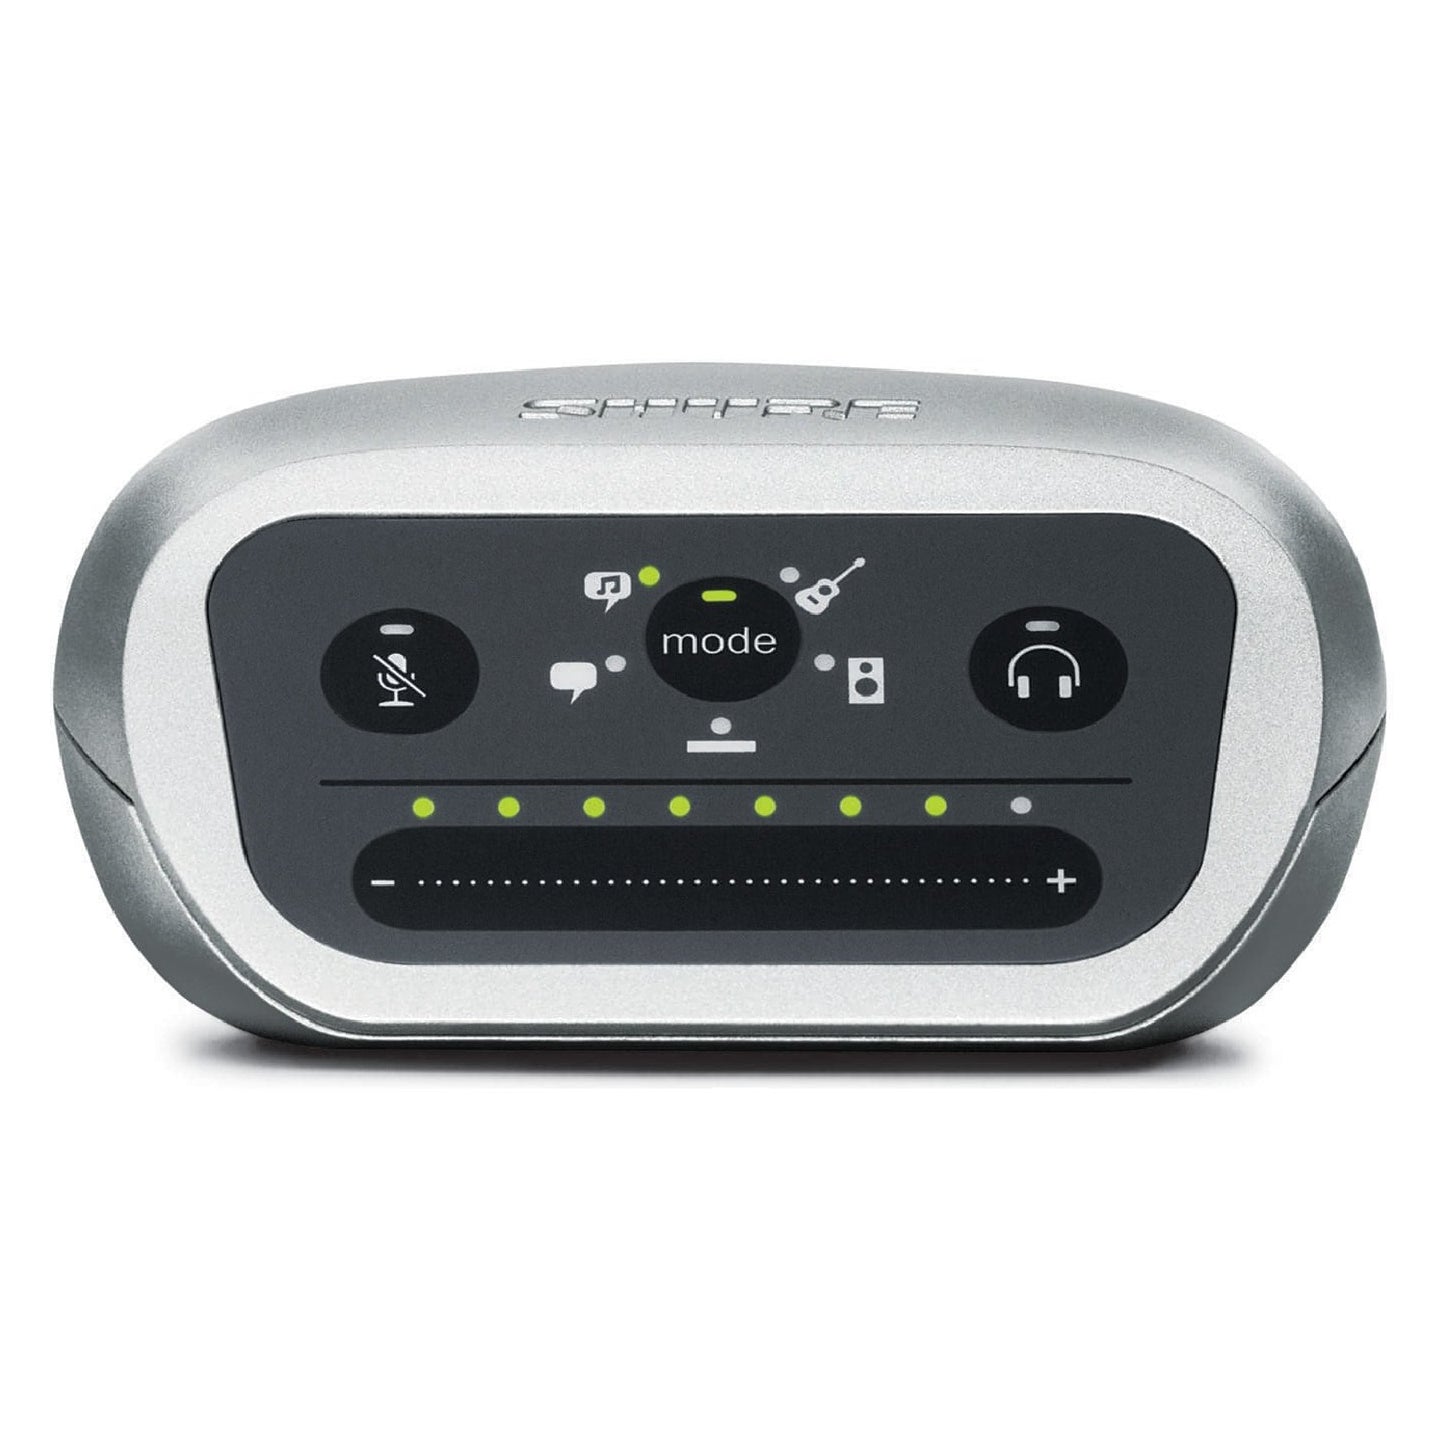 Shure MVi/A-LTG Digital Audio Interface for Mac, PC, iPhone, iPod, iPad and Android